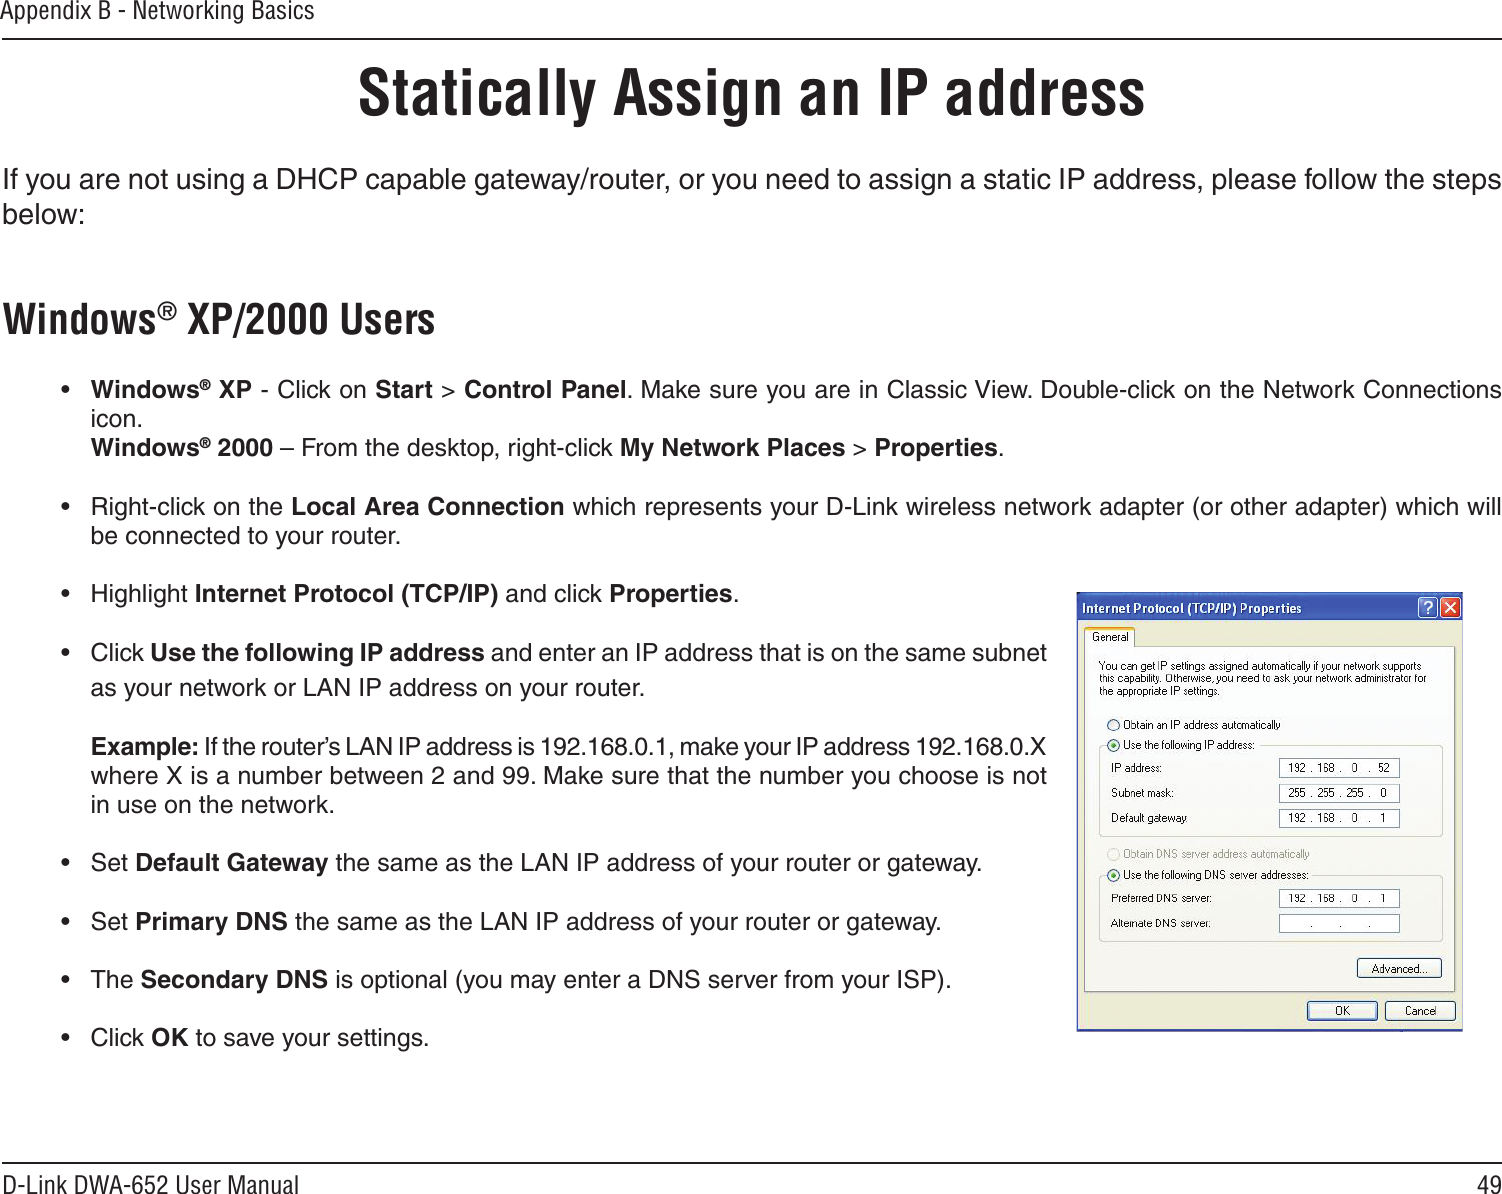 49D-Link DWA-652 User ManualAppendix B - Networking BasicsStatically Assign an IP addressIf you are not using a DHCP capable gateway/router, or you need to assign a static IP address, please follow the steps below:Windows® XP/2000 Users•  Windows® XP - Click on Start &gt; Control Panel. Make sure you are in Classic View. Double-click on the Network Connections icon. Windows® 2000 – From the desktop, right-click My Network Places &gt; Properties.•  Right-click on the Local Area Connection which represents your D-Link wireless network adapter (or other adapter) which will be connected to your router.•  Highlight Internet Protocol (TCP/IP) and click Properties.•  Click Use the following IP address and enter an IP address that is on the same subnet as your network or LAN IP address on your router. Example: If the router’s LAN IP address is 192.168.0.1, make your IP address 192.168.0.X where X is a number between 2 and 99. Make sure that the number you choose is not in use on the network. •  Set Default Gateway the same as the LAN IP address of your router or gateway.•  Set Primary DNS the same as the LAN IP address of your router or gateway. •  The Secondary DNS is optional (you may enter a DNS server from your ISP).•  Click OK to save your settings.